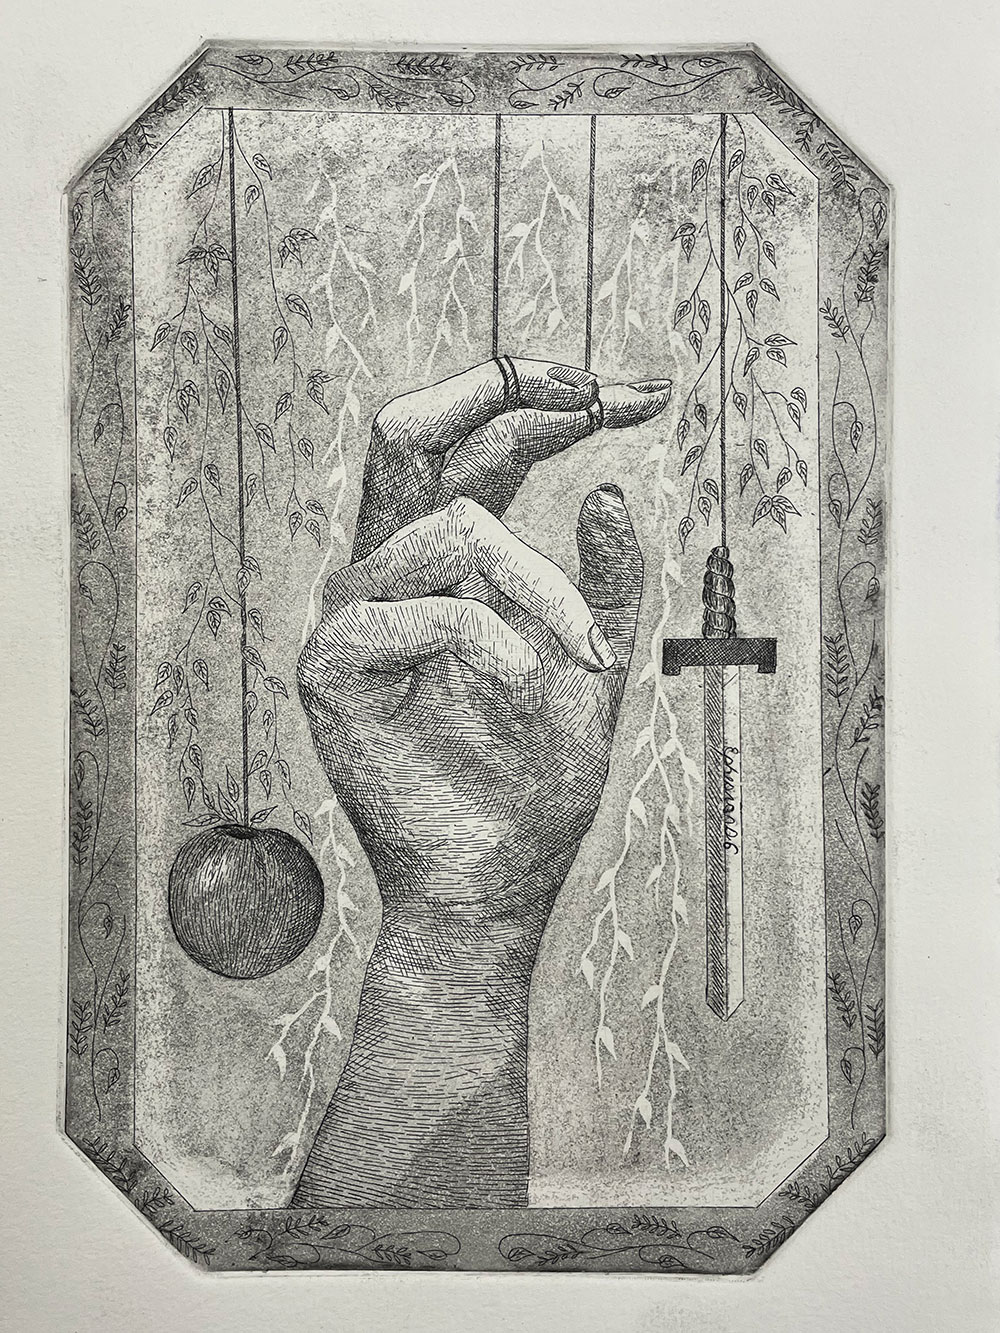 A printed image of a hand wit two fingers attached to string holding a sword and an apple